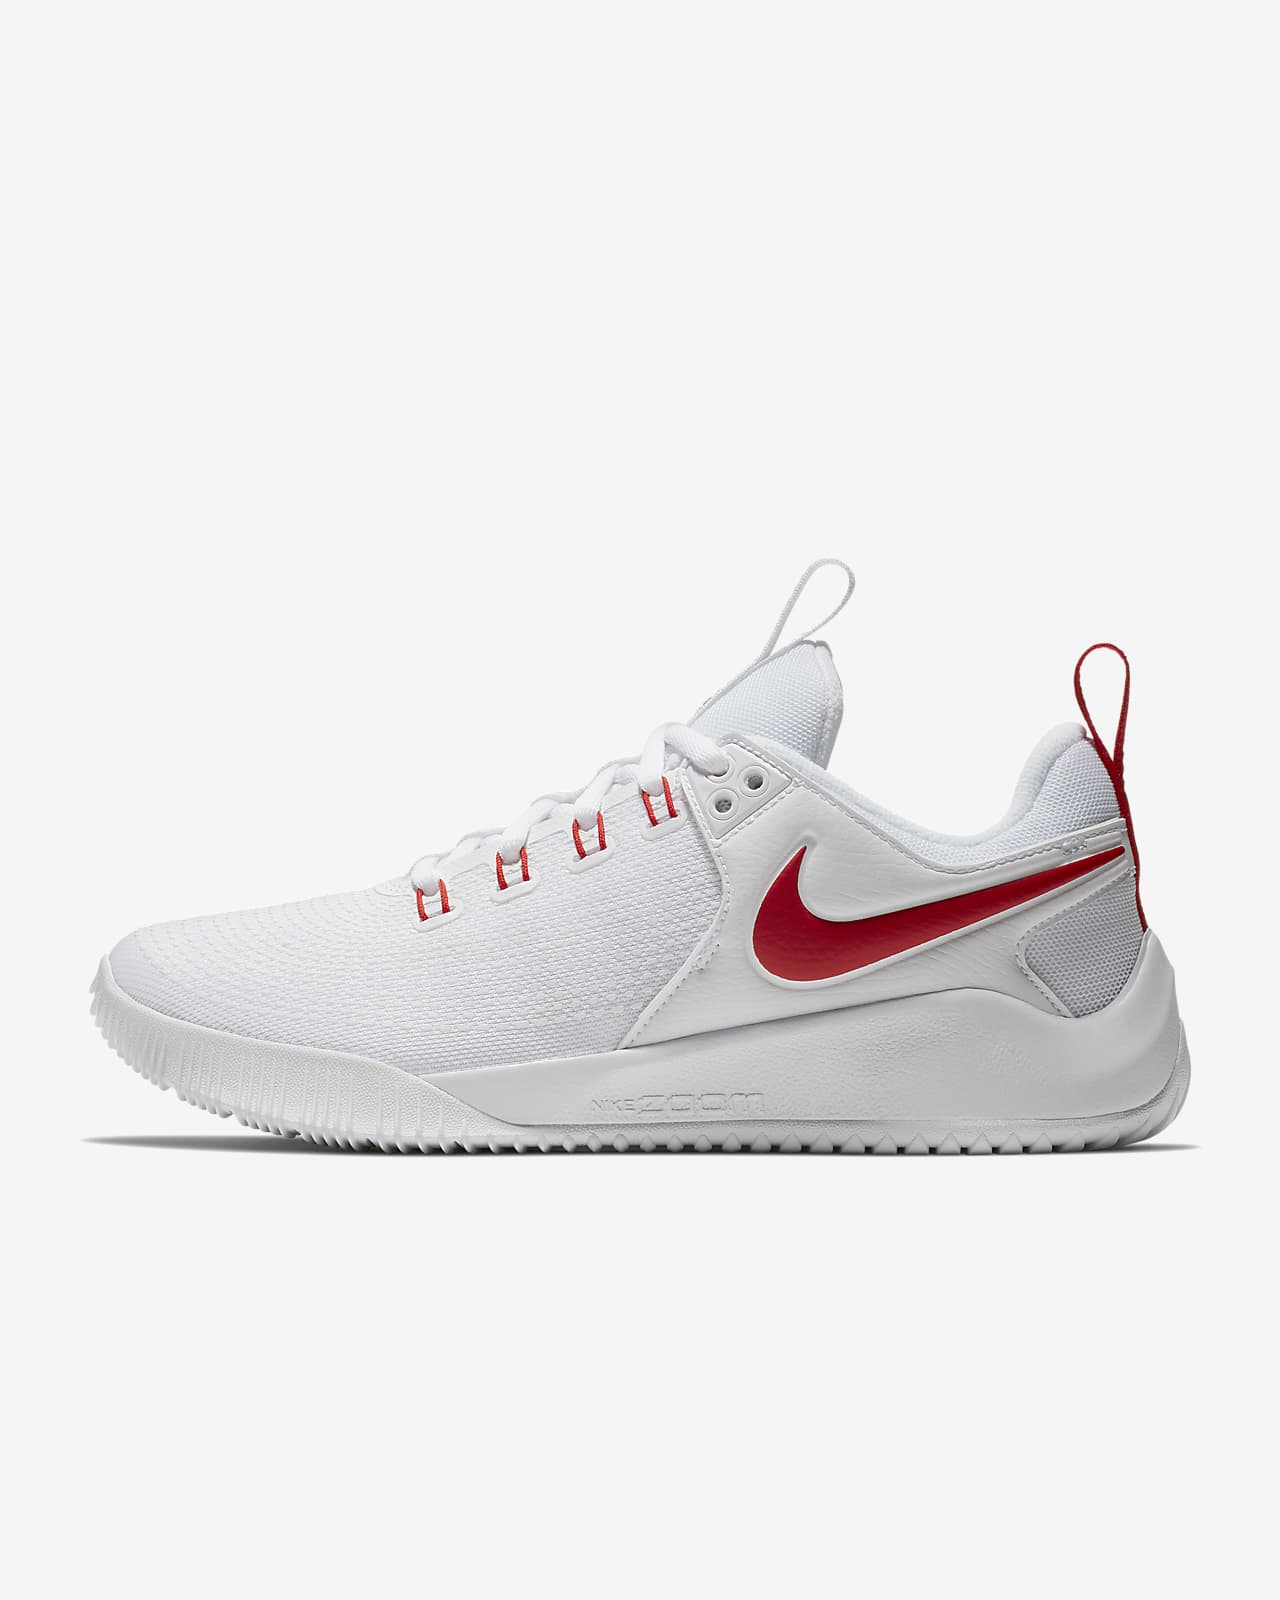 nike hyperzoom ace 2 cheap online